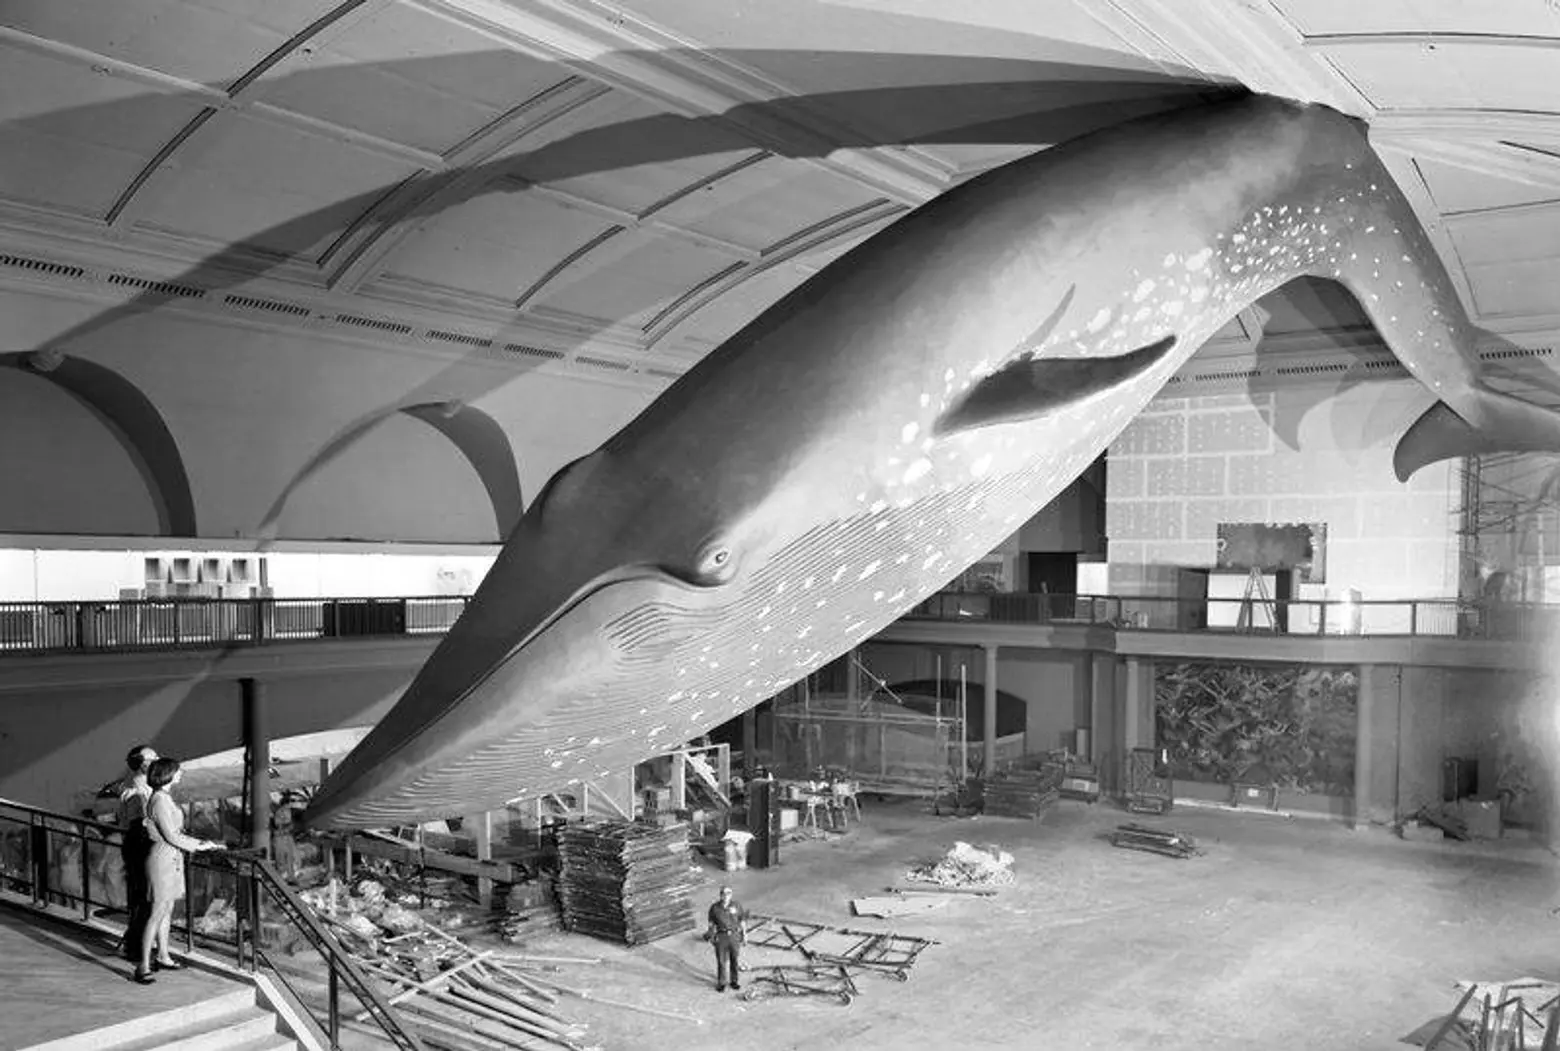 Photos from 1968 show the Museum of Natural History’s 94-foot blue whale being hung